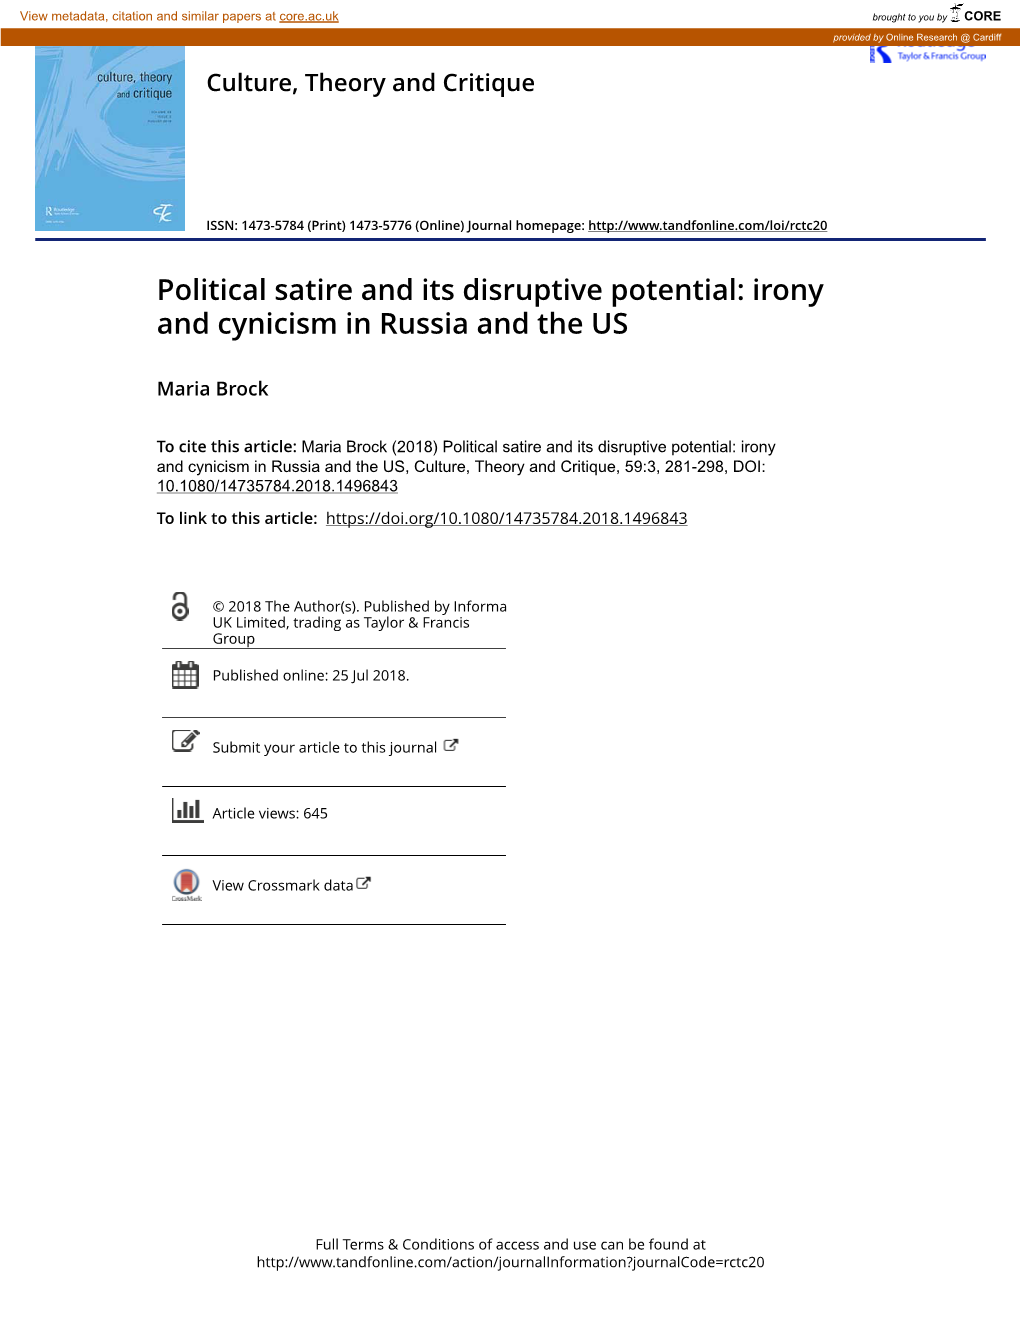 Political Satire and Its Disruptive Potential: Irony and Cynicism in Russia and the US